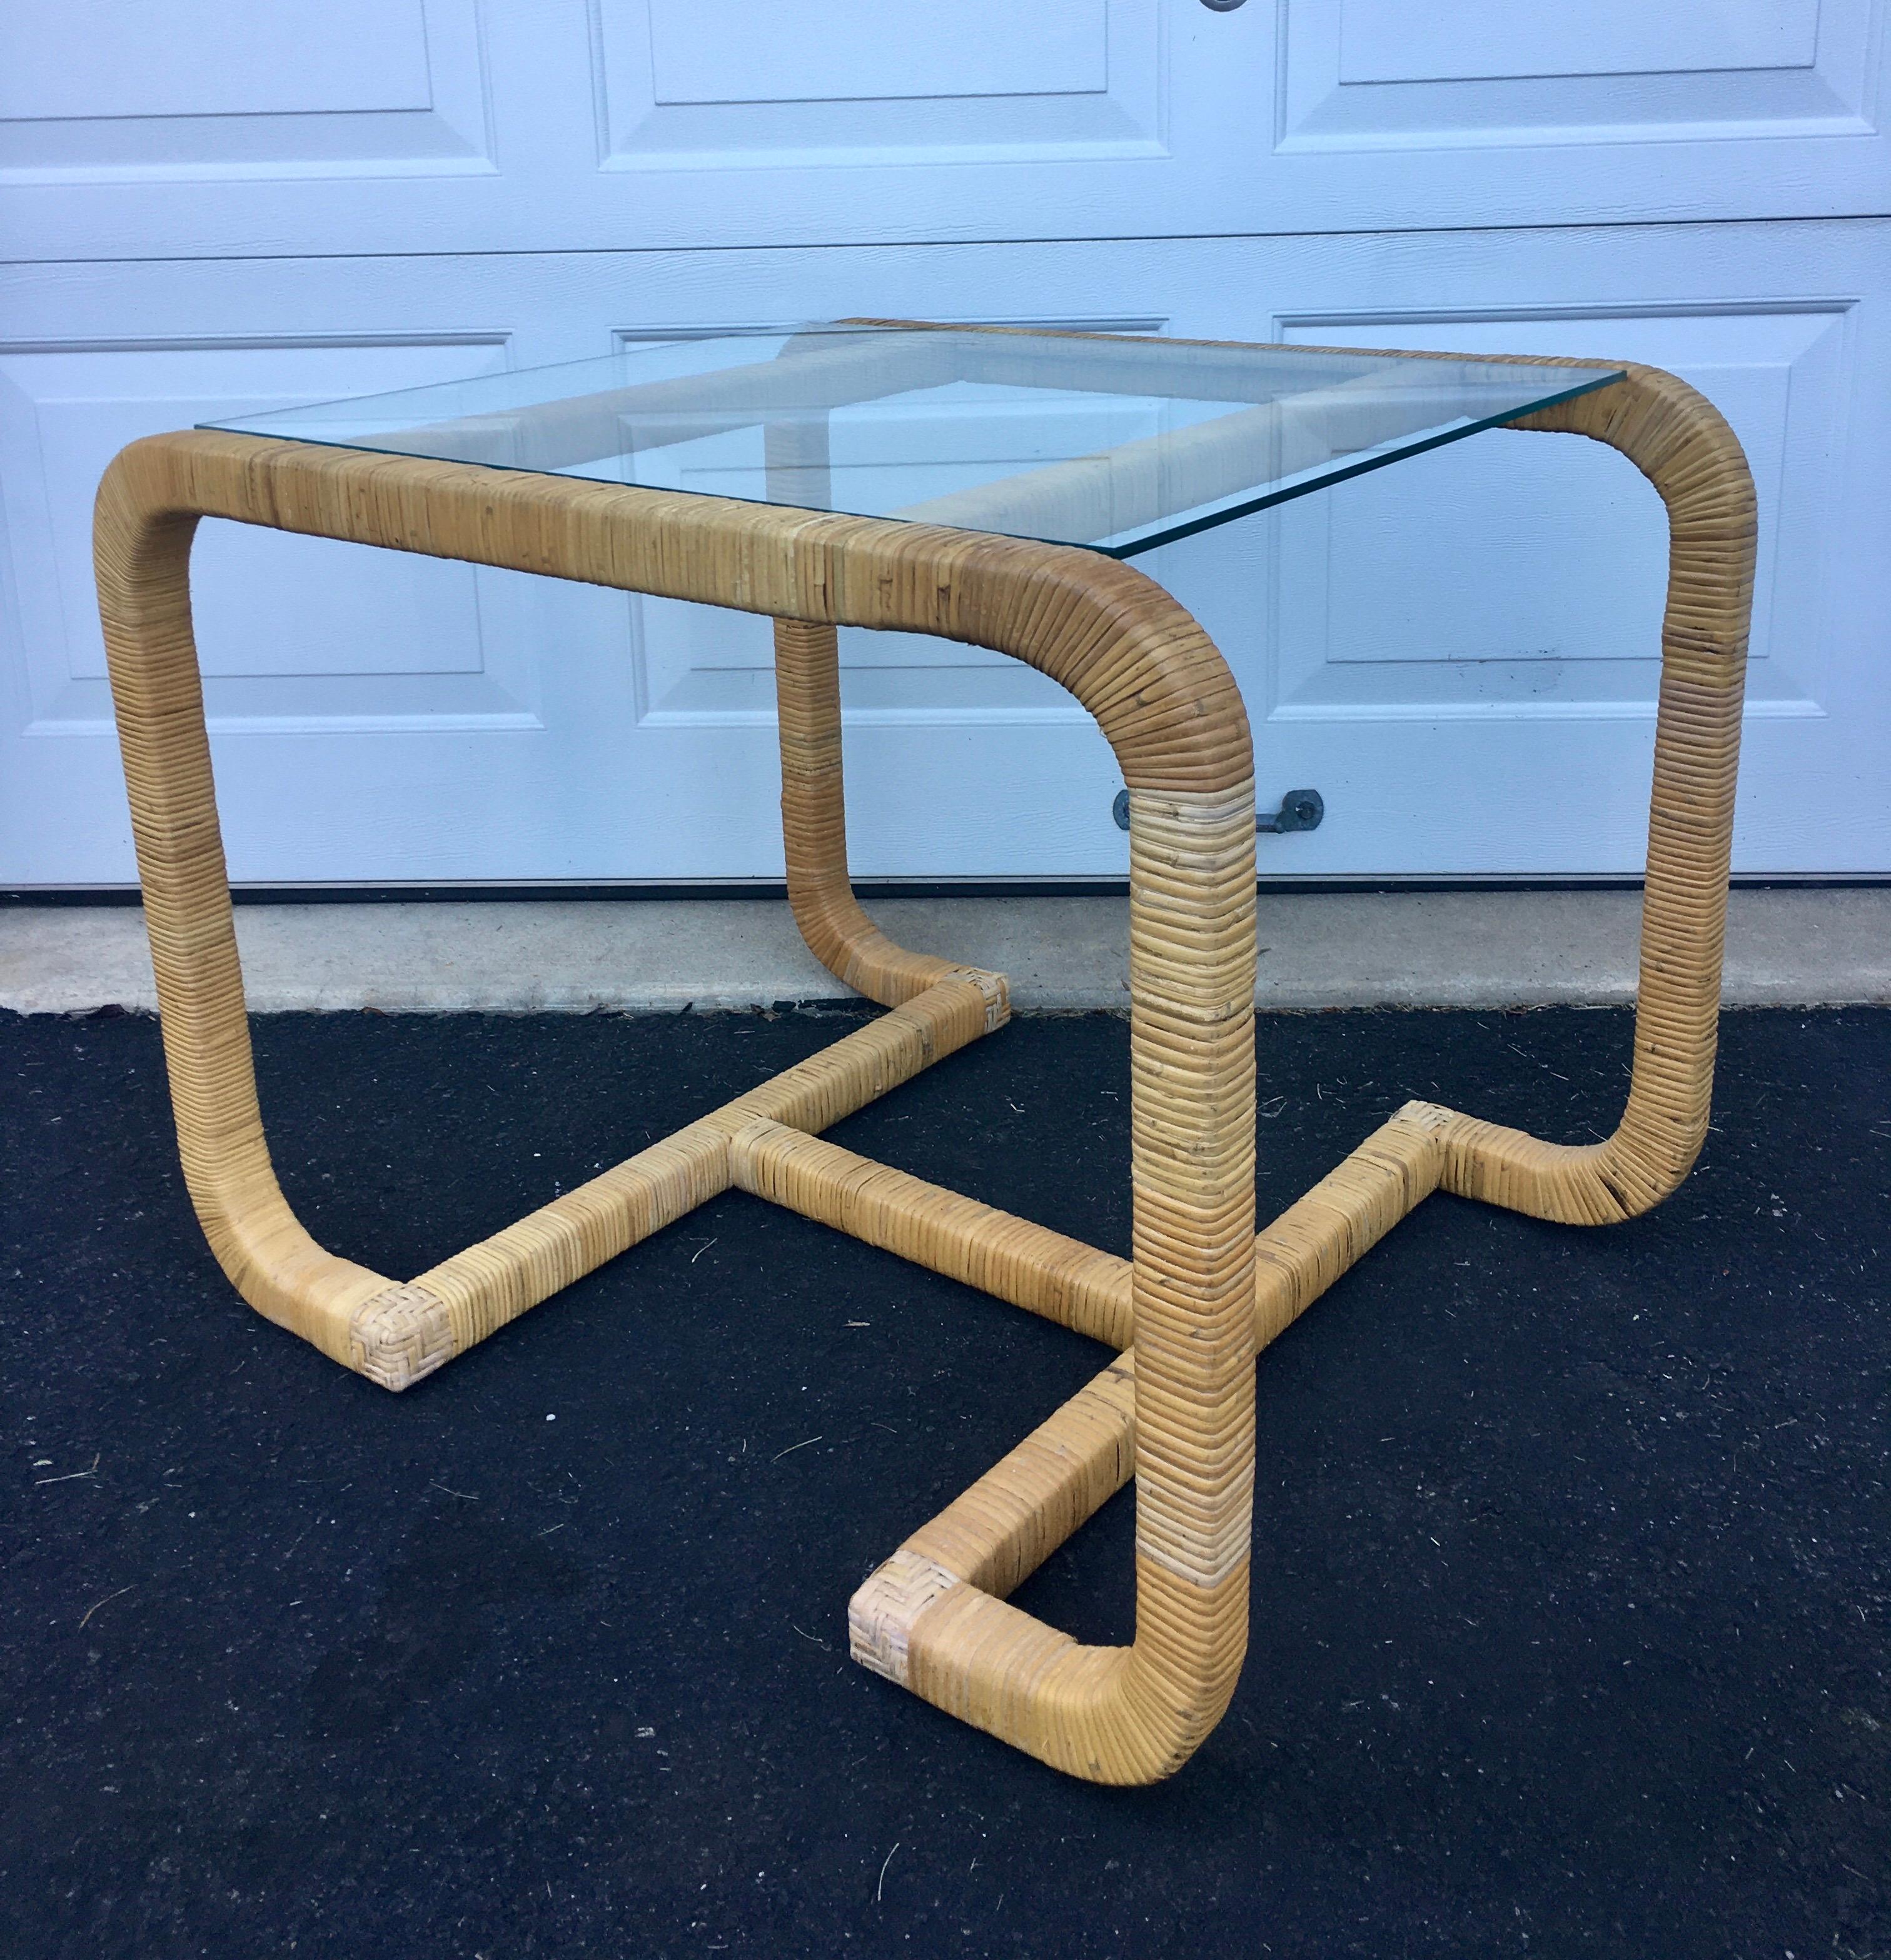 Vintage Mid-Century Modern rattan wrapped side or end table with clear glass top. Sculptural wood frame features an H-shaped base wrapped in natural toned rattan. Can be used as a bedside table or as a unique hall occasion center or cocktail table.